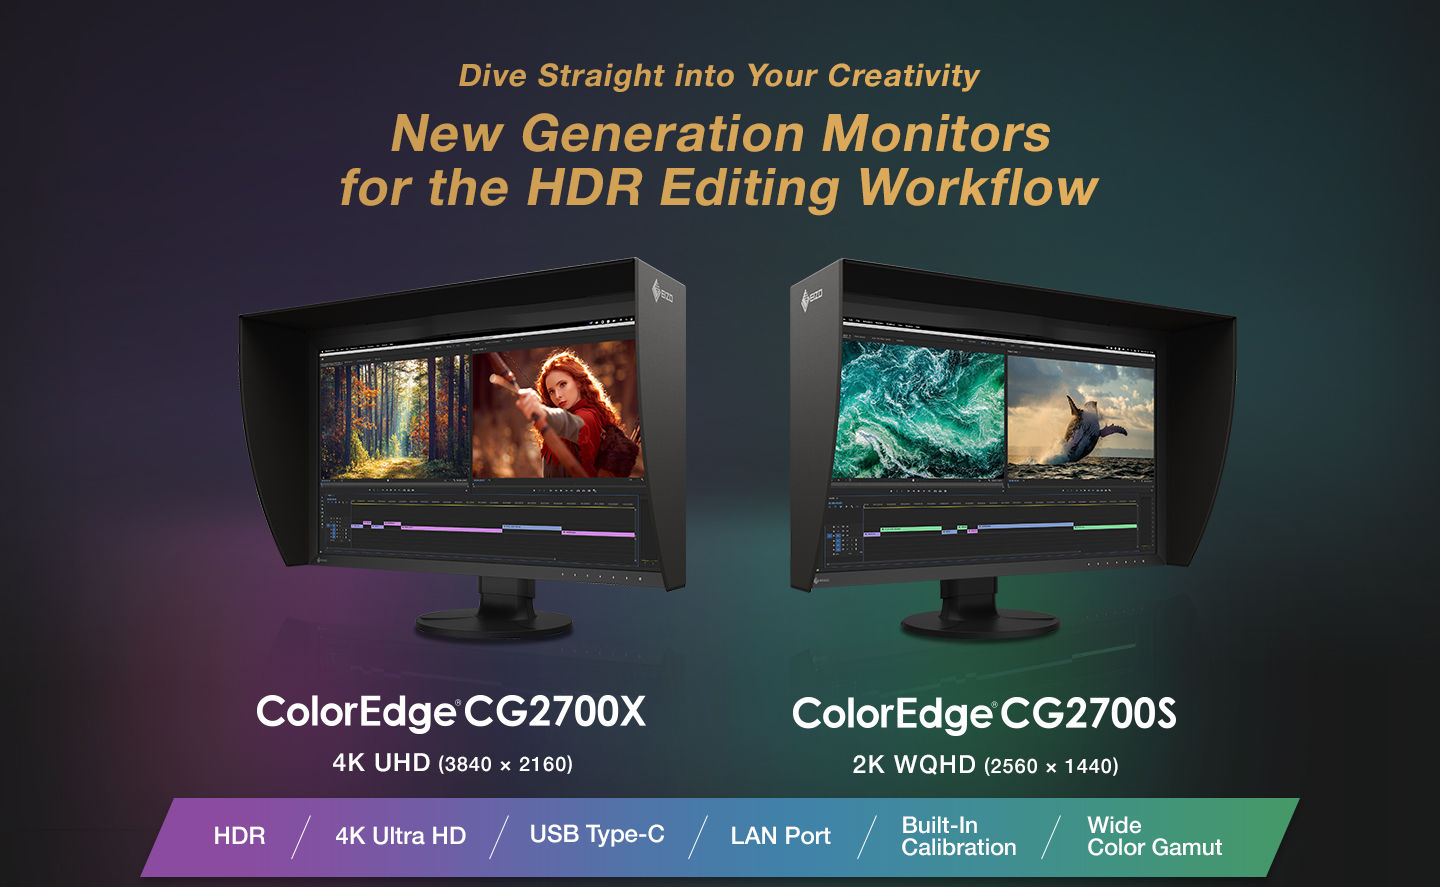 A header image showing the EIZO ColorEdge CG2700X and CG2700S monitors, with a colored gradient background.